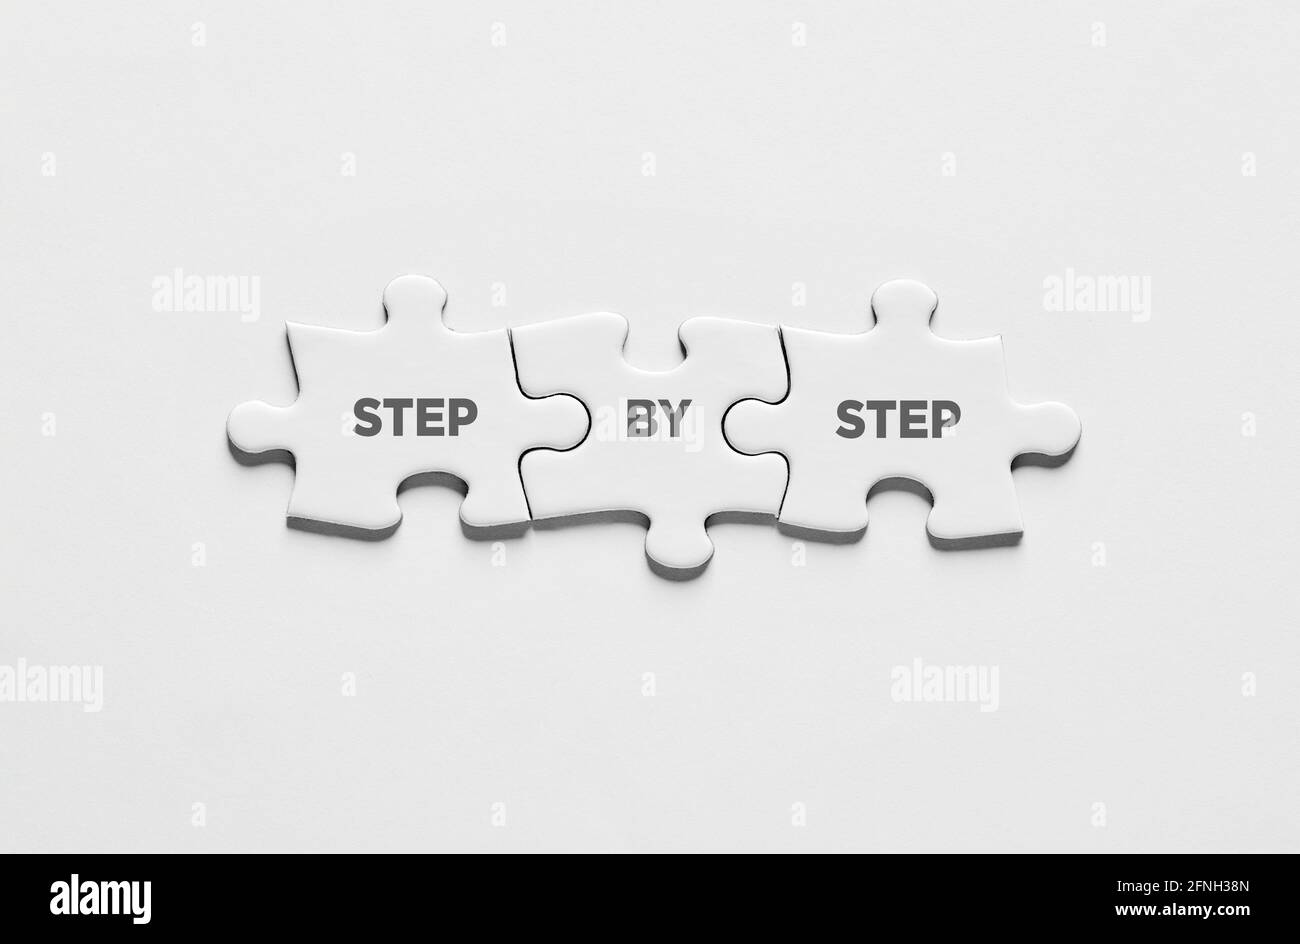 Achievement, progress or patience in business, career, education or learning. The message step by step on connected jigsaw puzzle pieces. Stock Photo